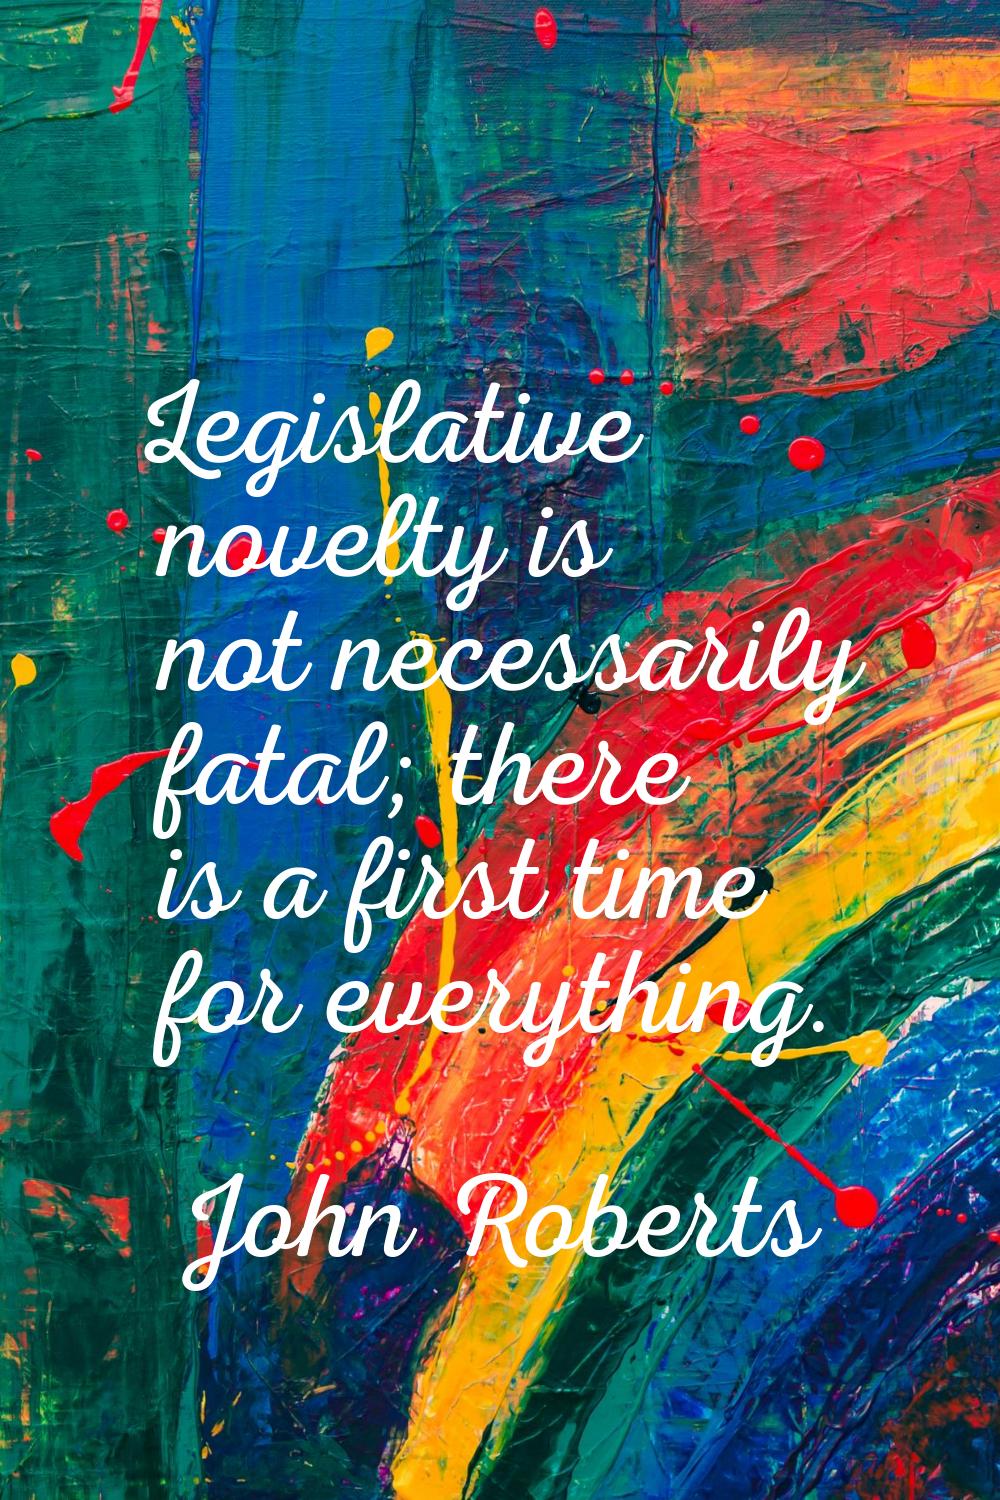 Legislative novelty is not necessarily fatal; there is a first time for everything.